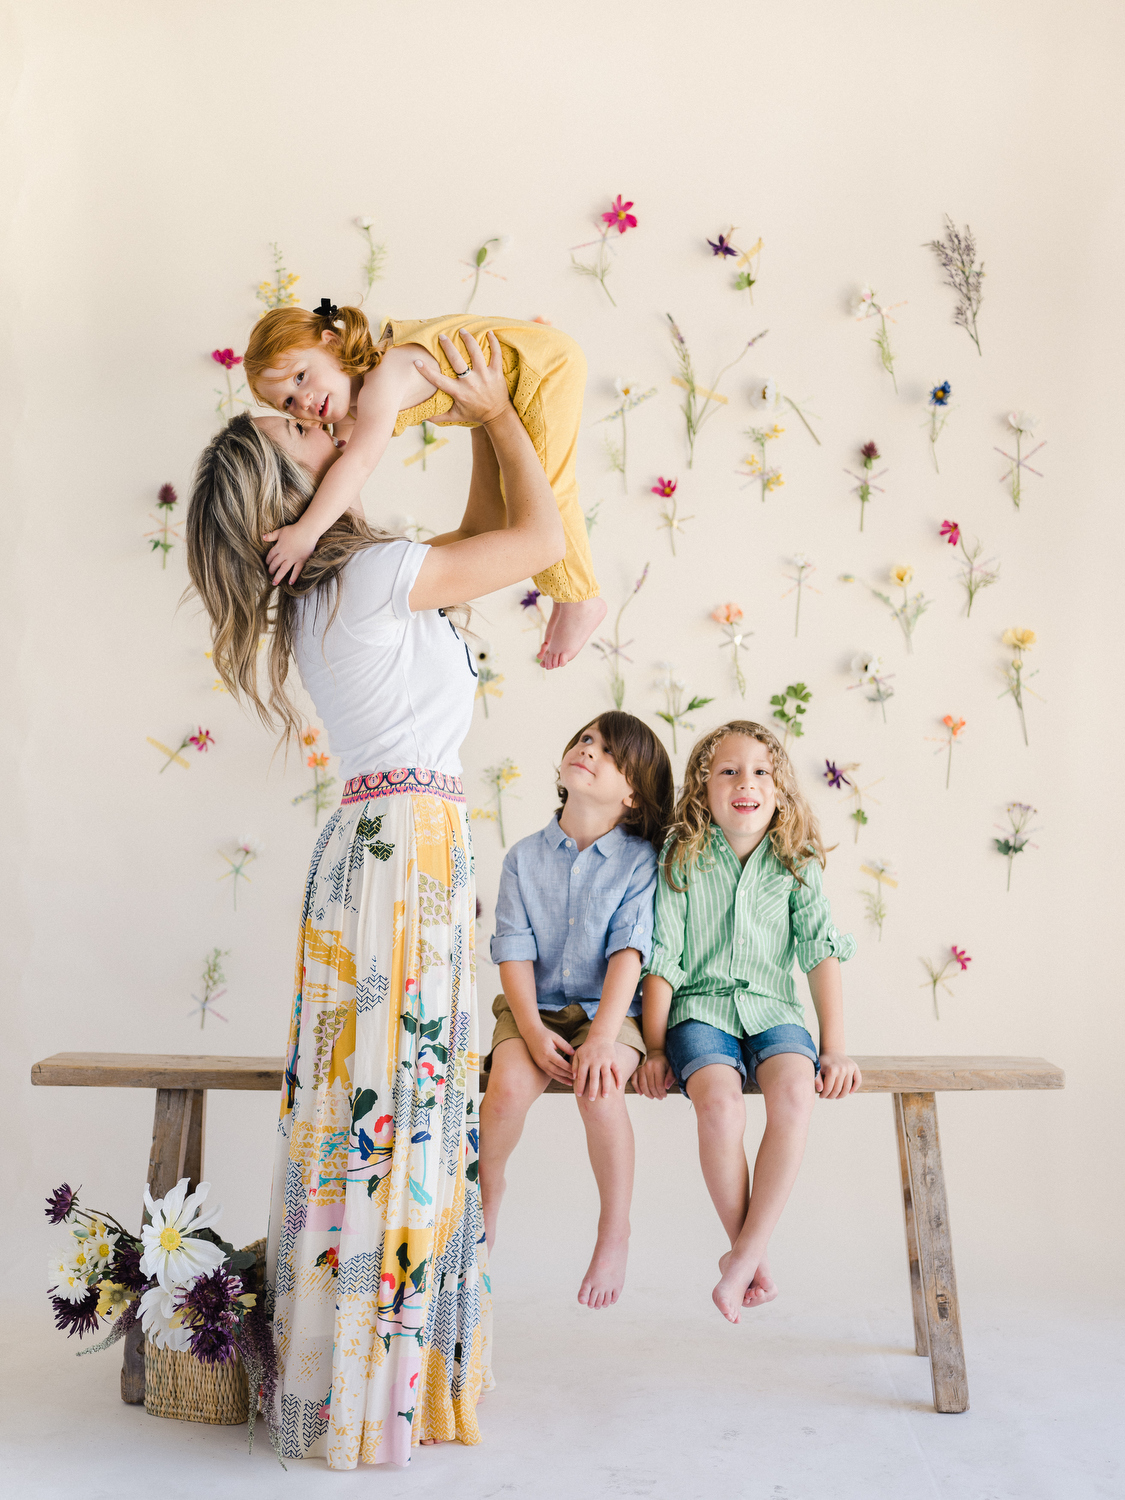 What to Wear for Your Spring Family Photo Shoot